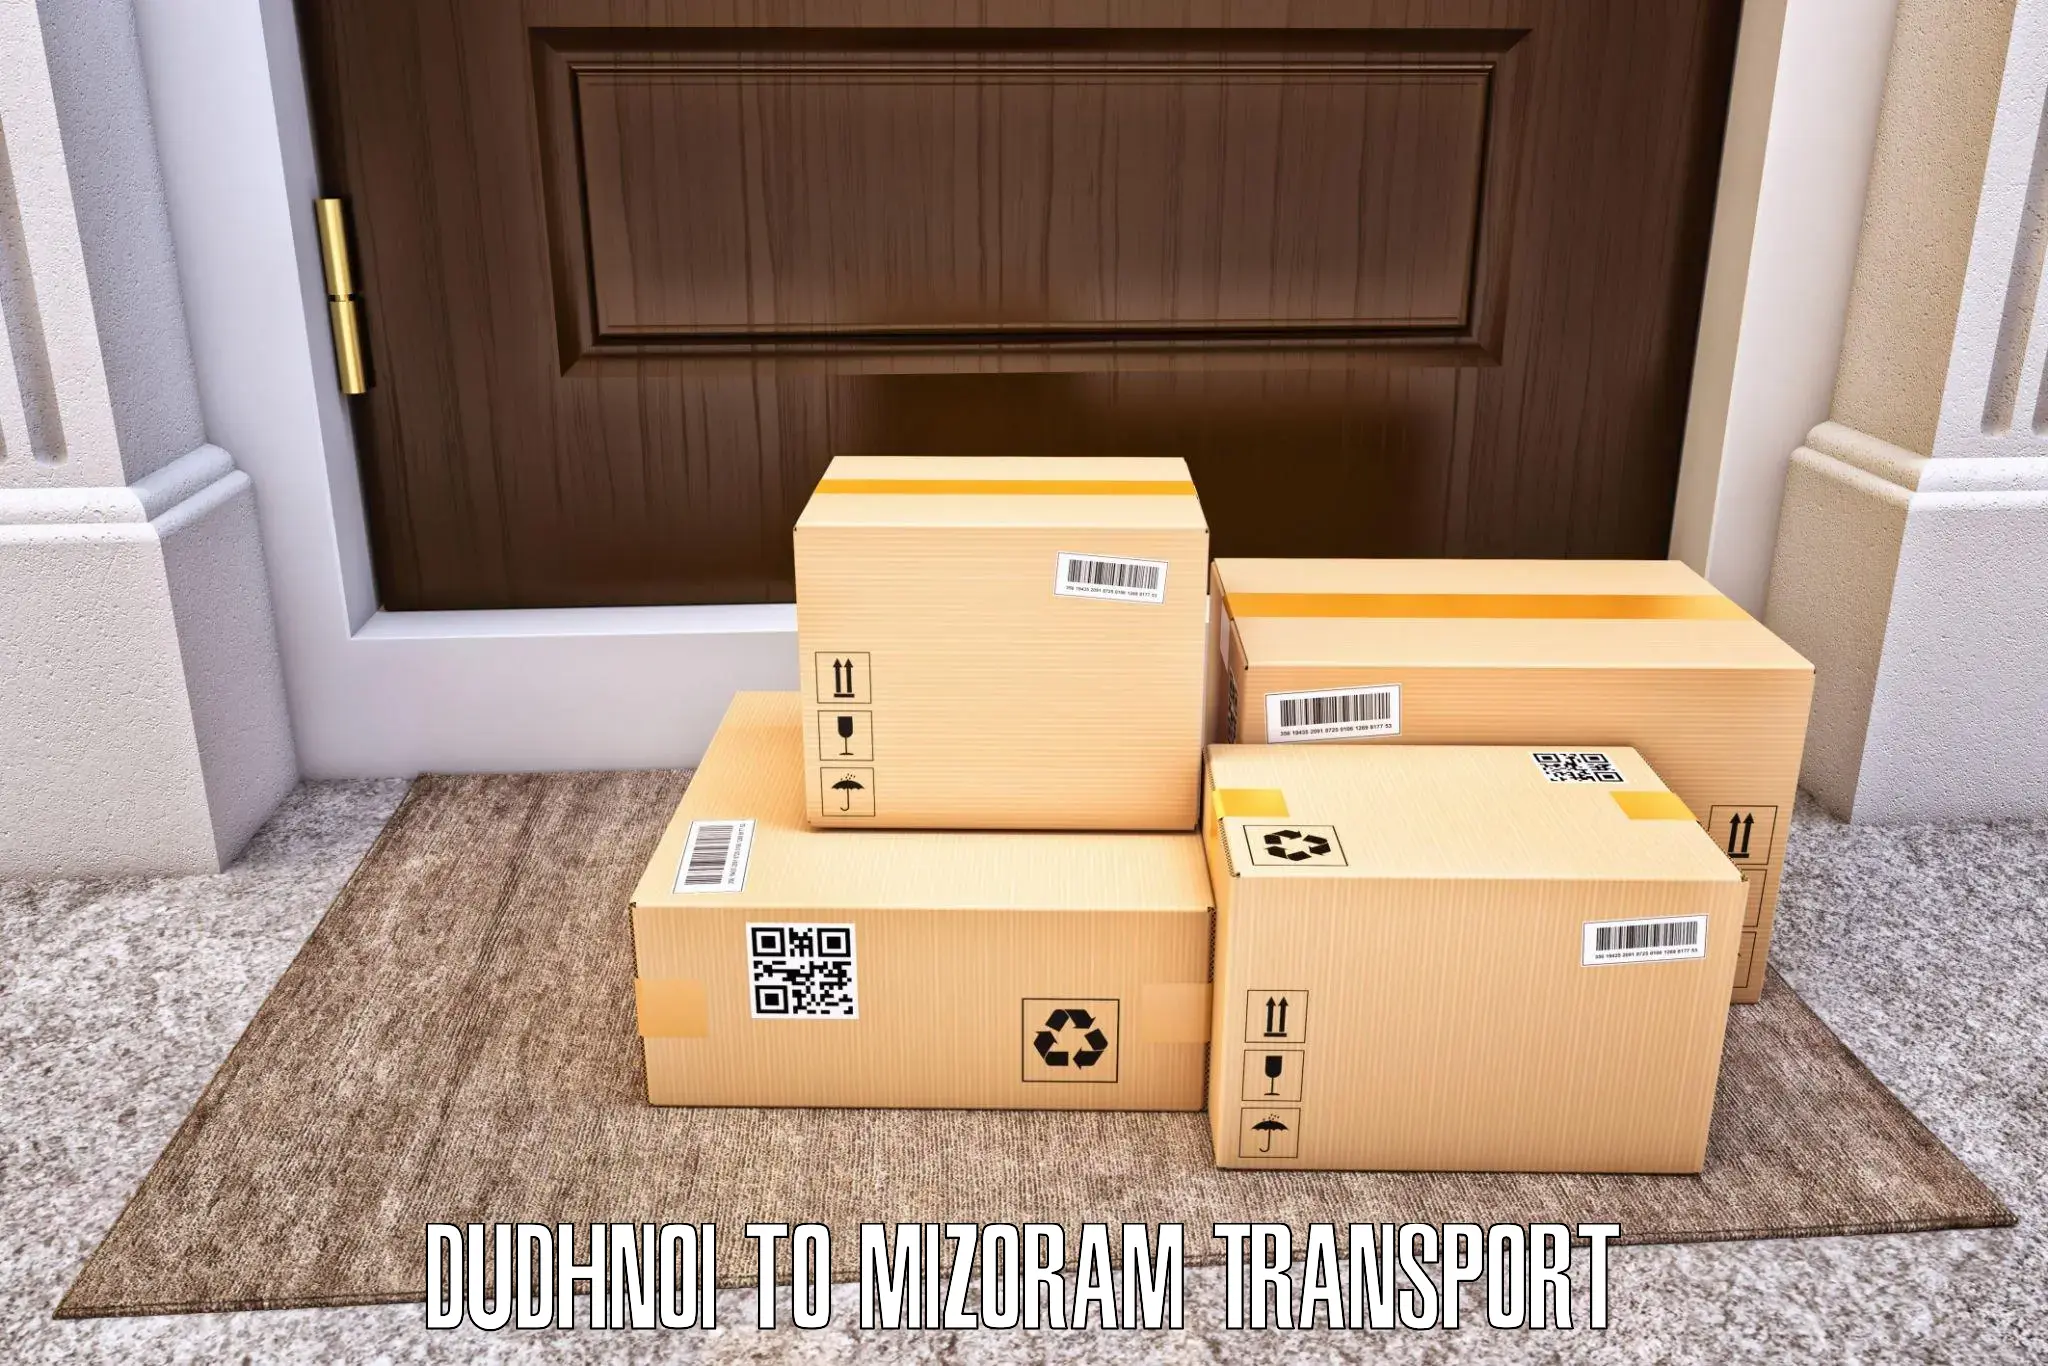 Part load transport service in India Dudhnoi to Mizoram